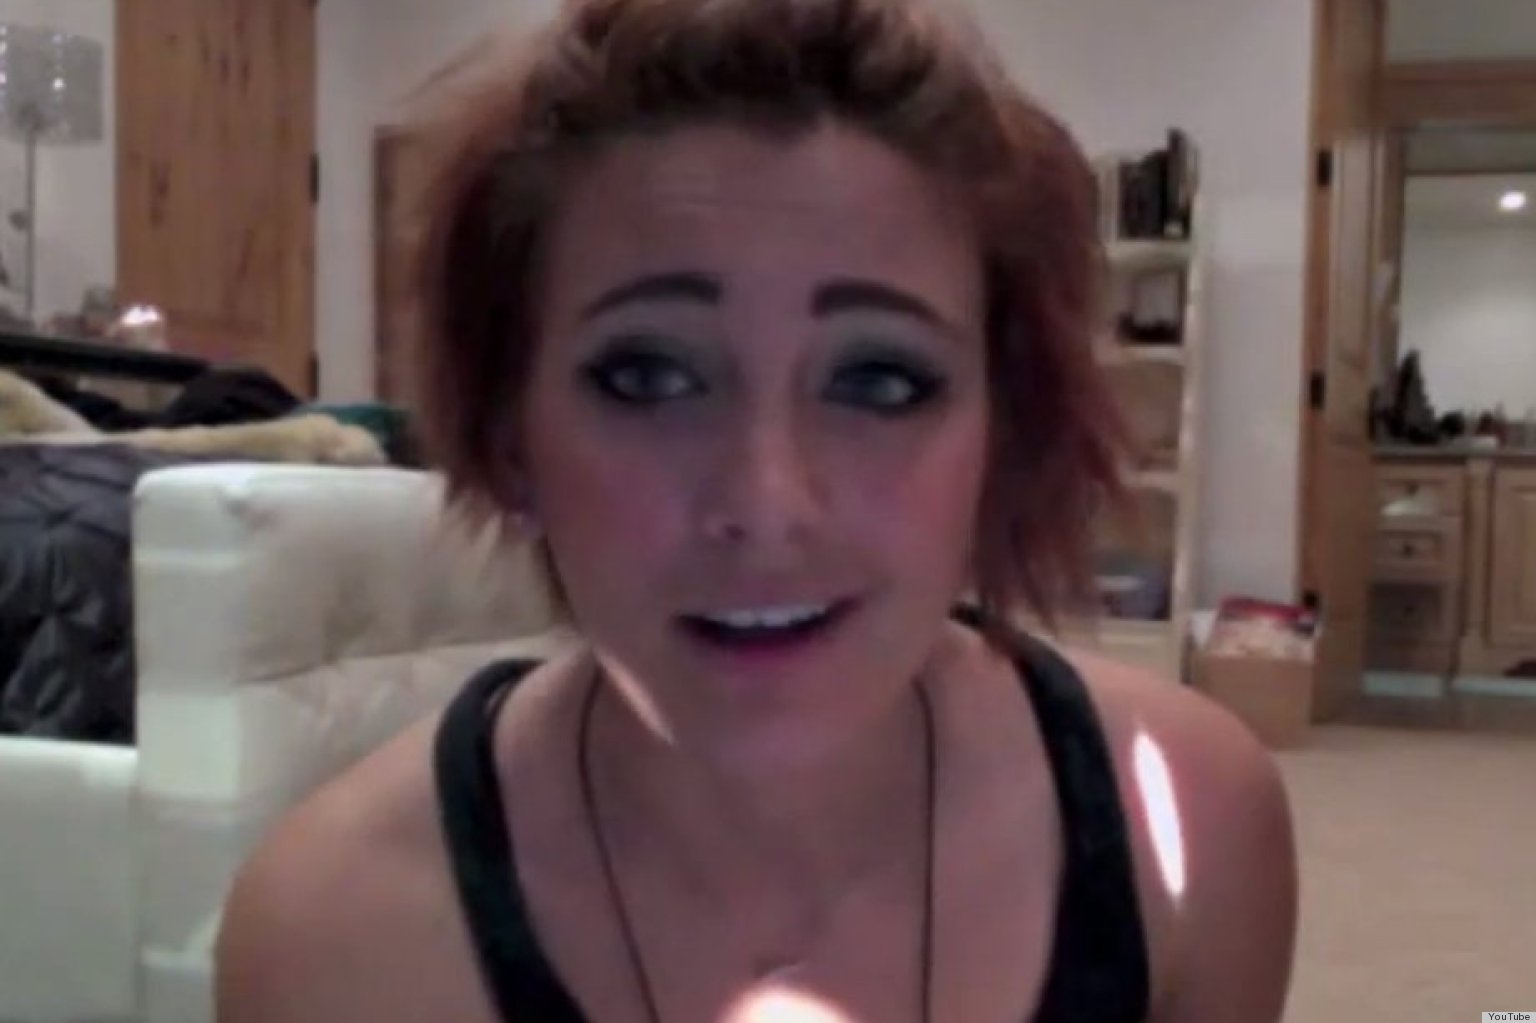 Paris Jacksons Makeup Tutorial Shows Shes Your Typical Teen VIDEO